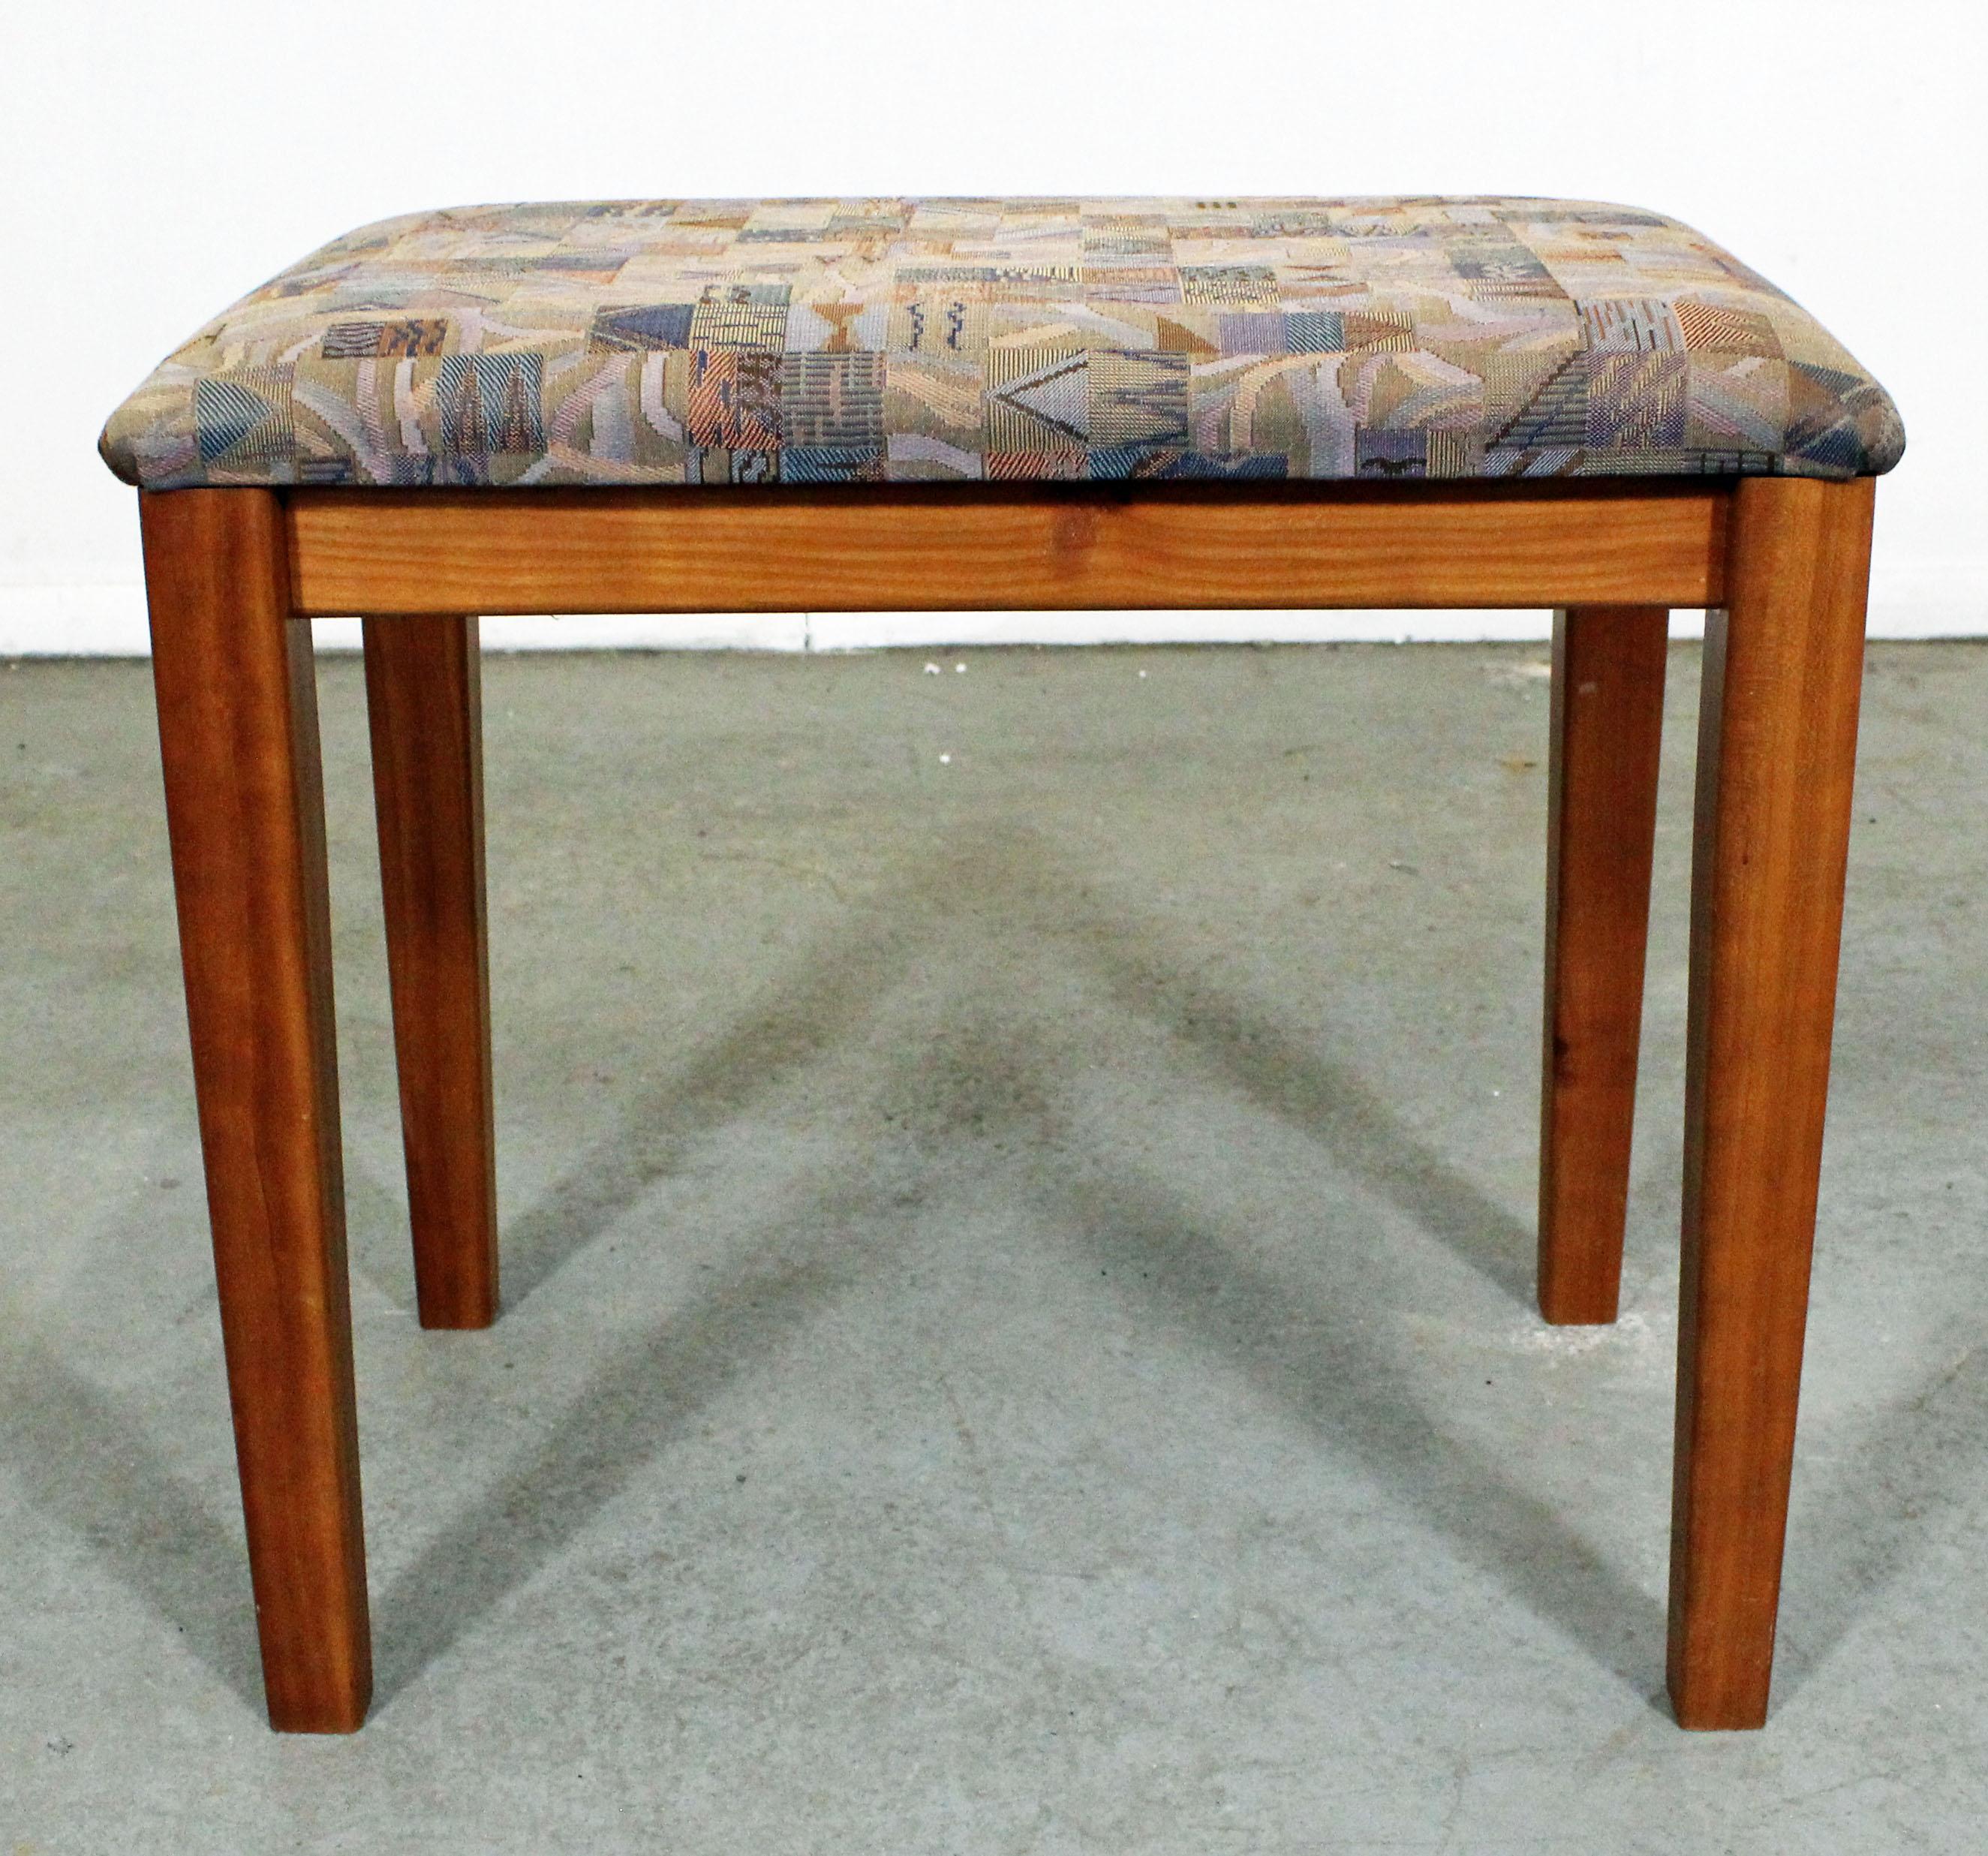 Offered is a Danish modern teak upholstered vanity stool made by PBJ Mobler. It is in good condition with slight wear (see pictures). A great stool that is ready to use. 

Dimensions: 21